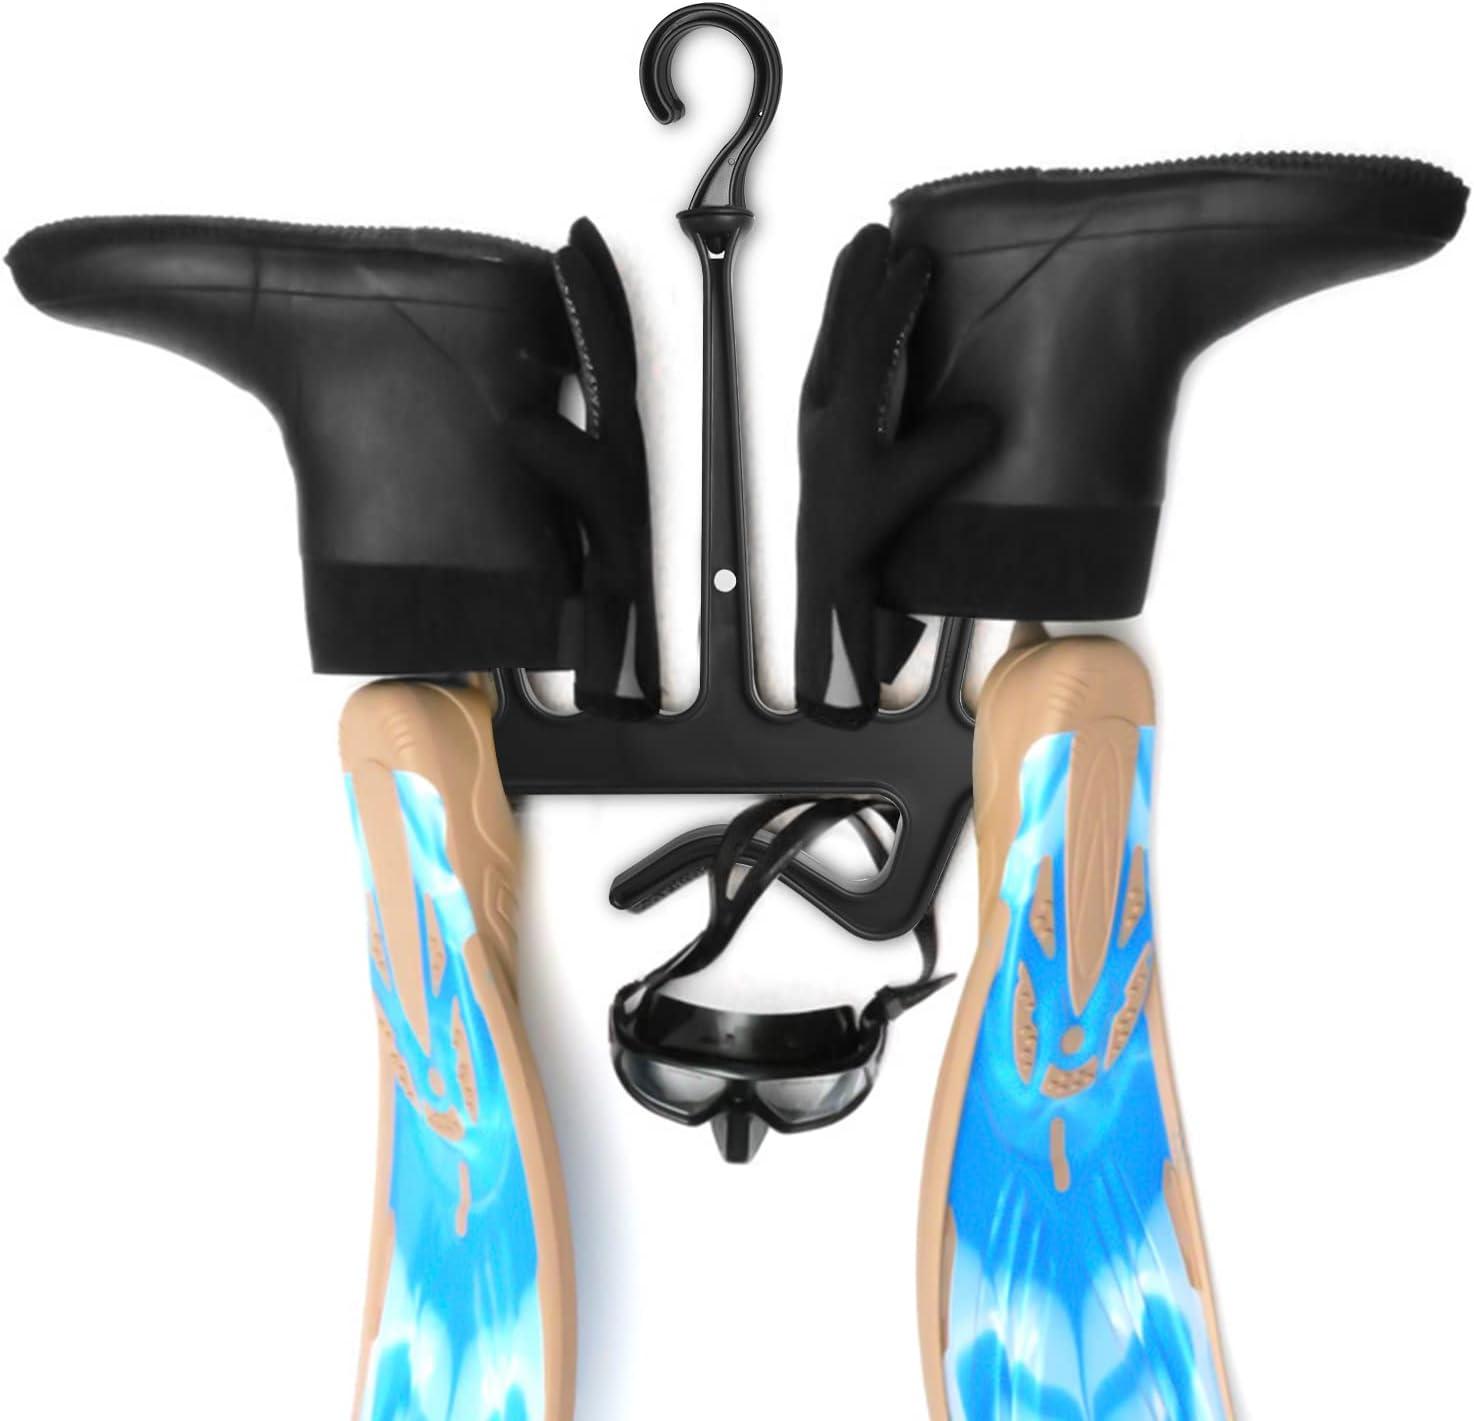 Scuba Dive 2 HANGERS BIG, THICK Durable Wetsuit Hanger for Drying